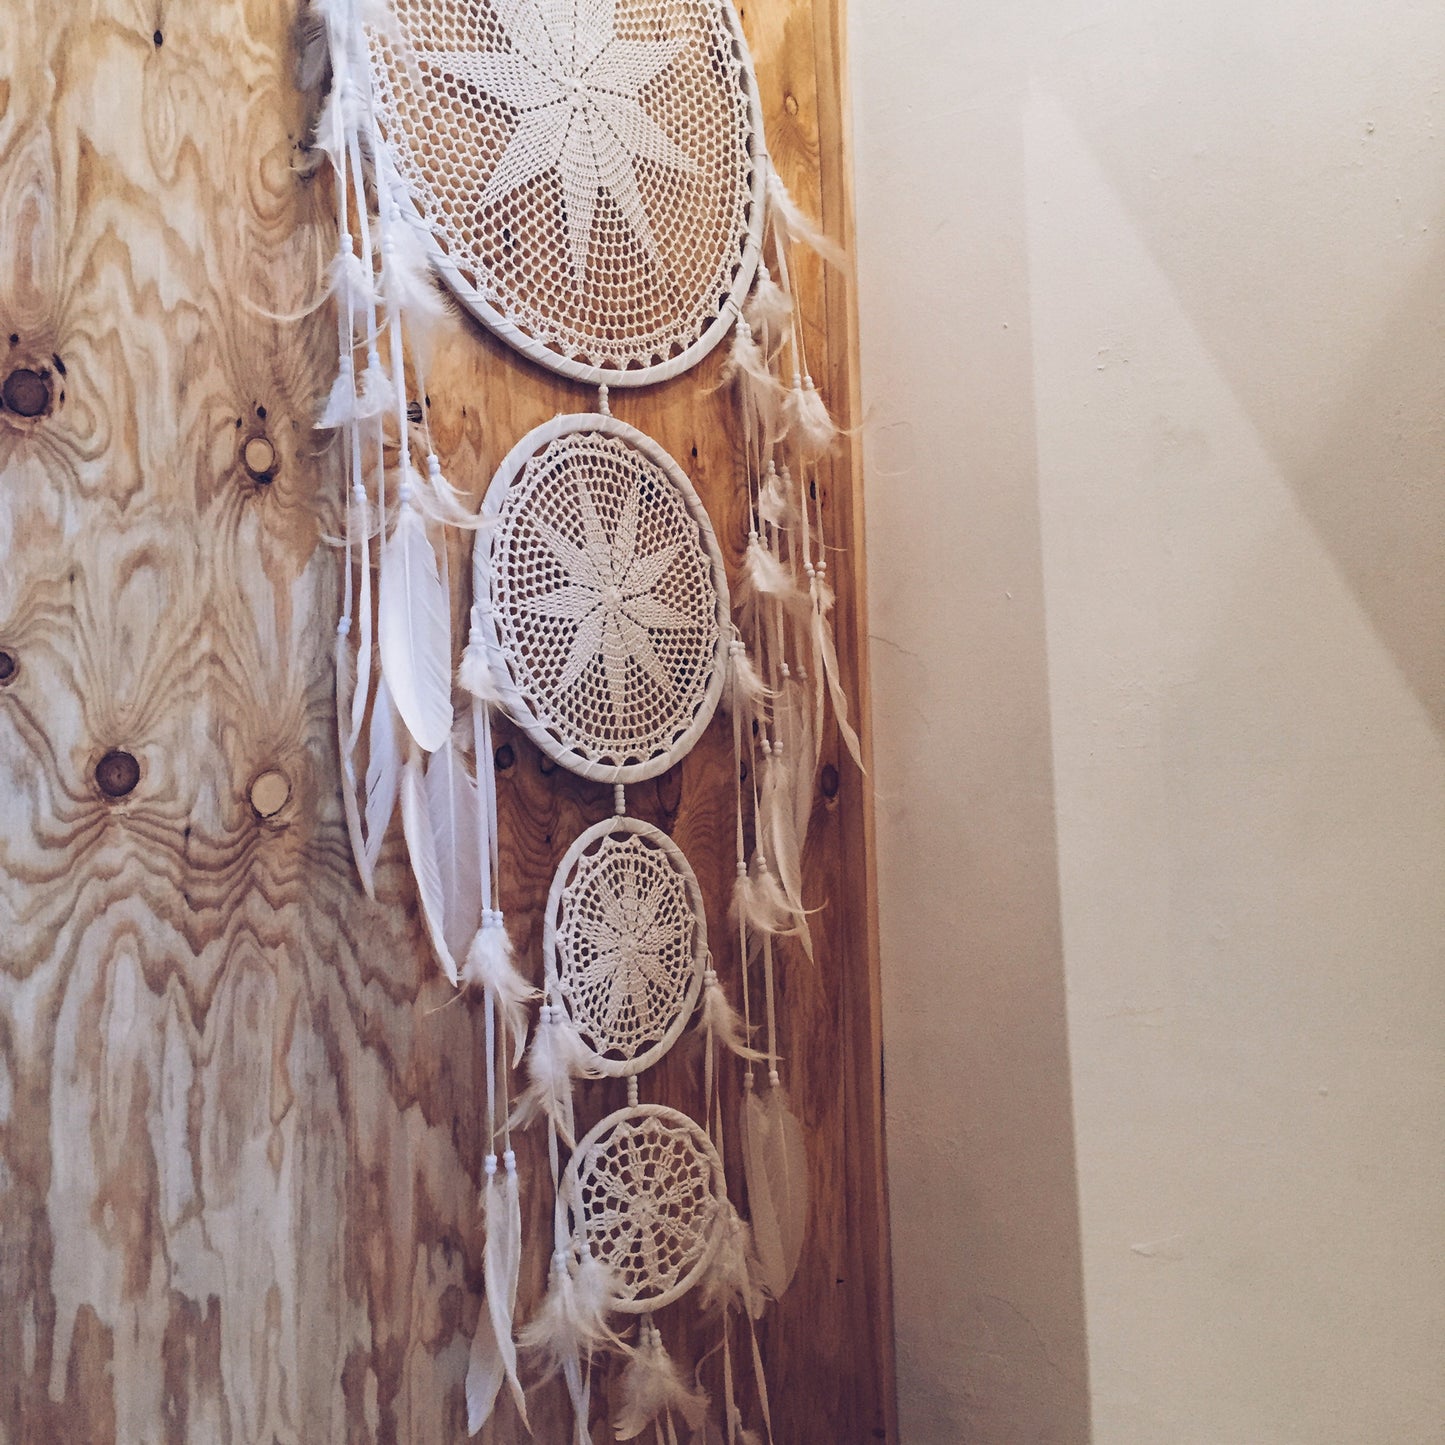 MAXI SIZE FEATHER DREAMCATCHER WALL HANGING